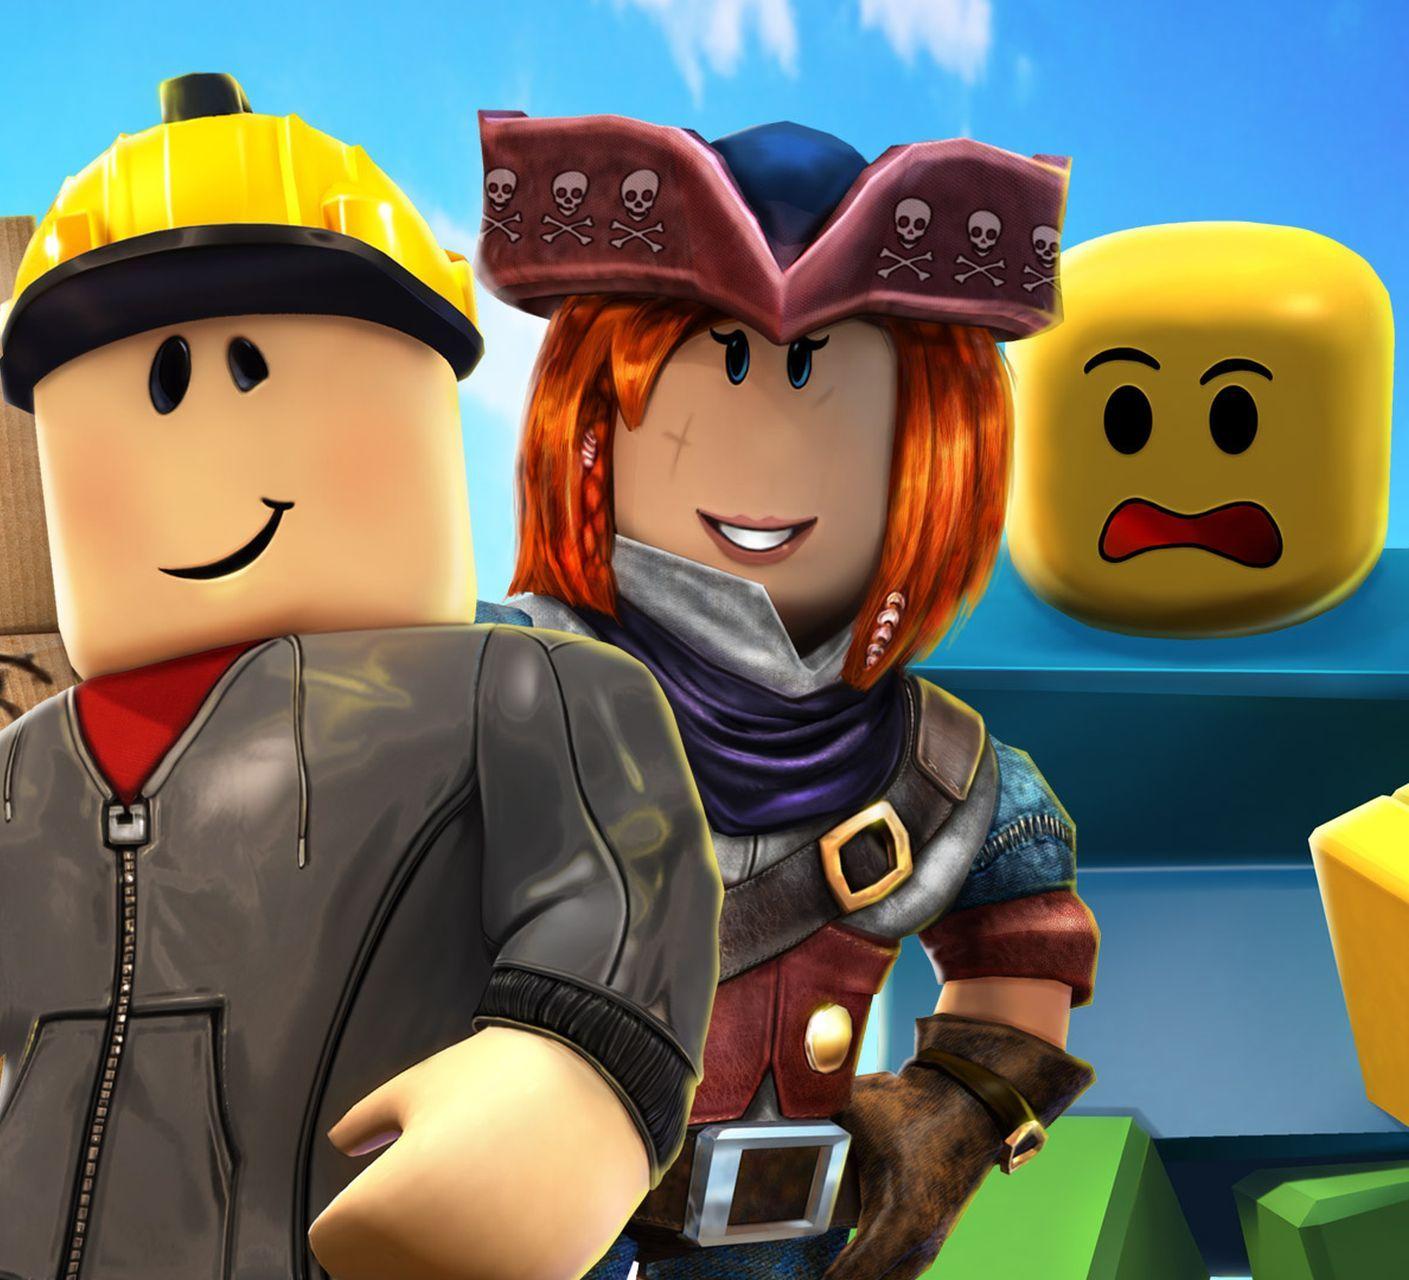 Roblox Wallpapers for Tablet, Mobile, Desktop, set as backgrounds